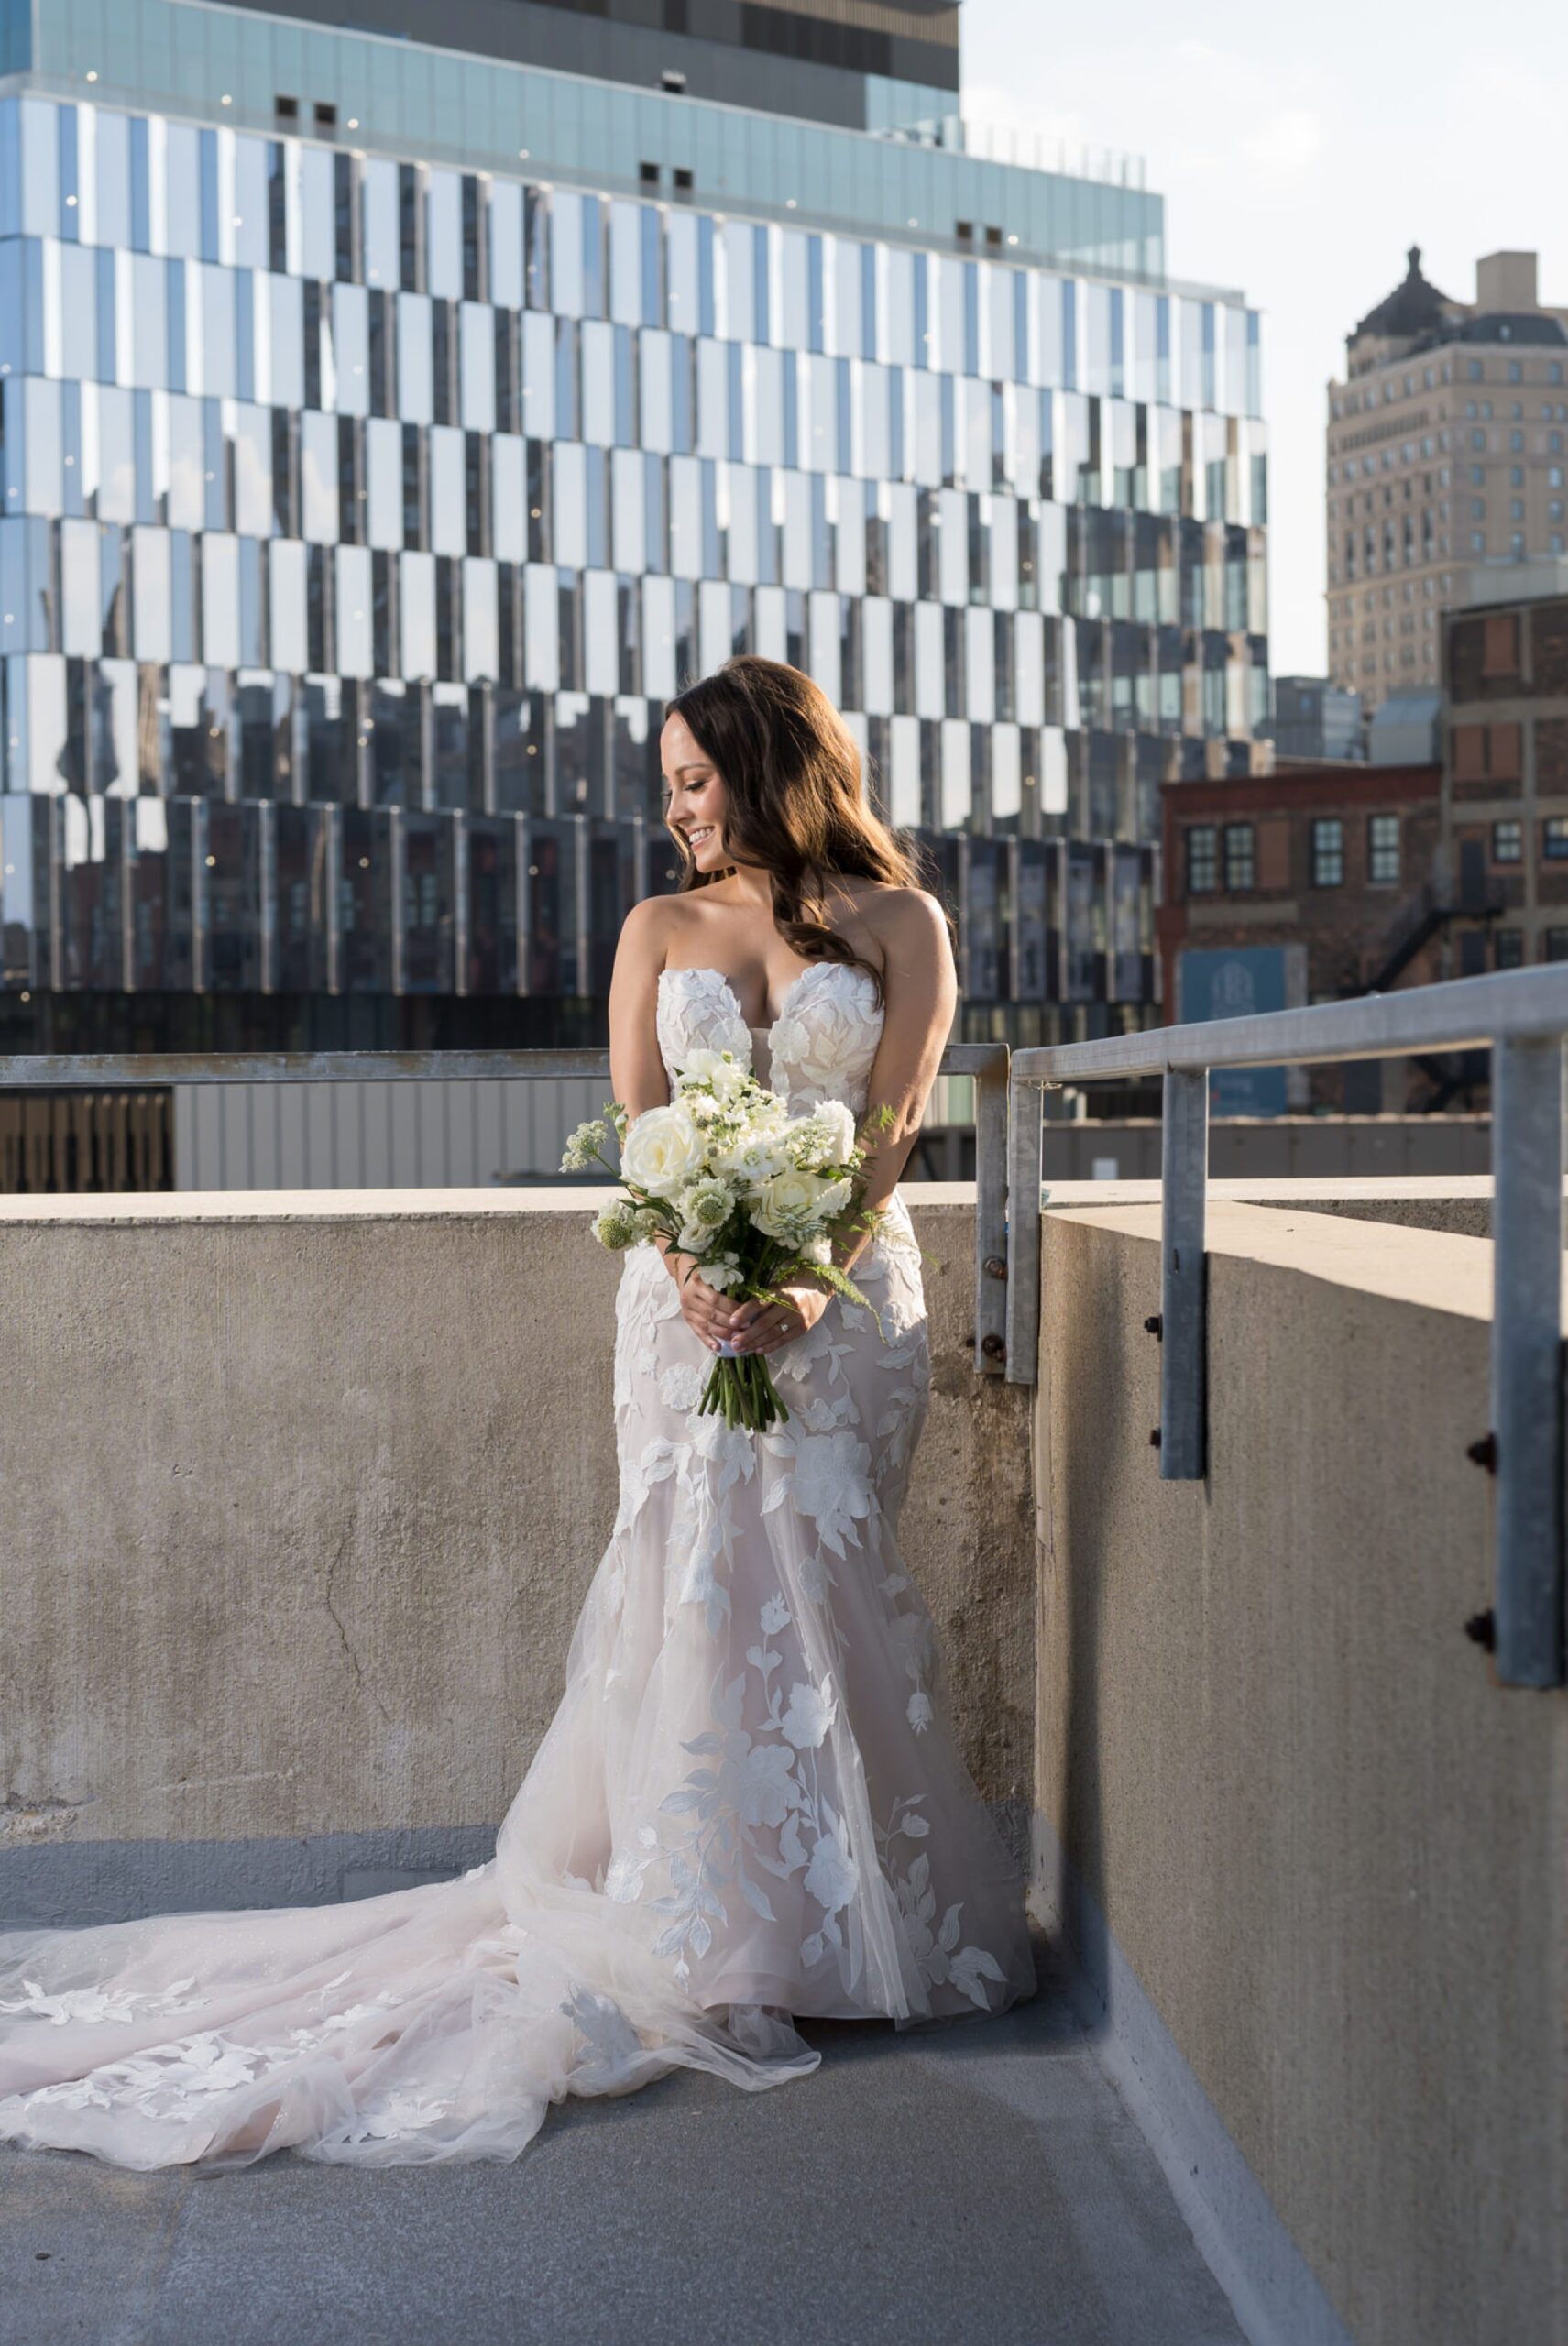 A bride poses with a Detroit skyscraper in the background on her wedding day.  